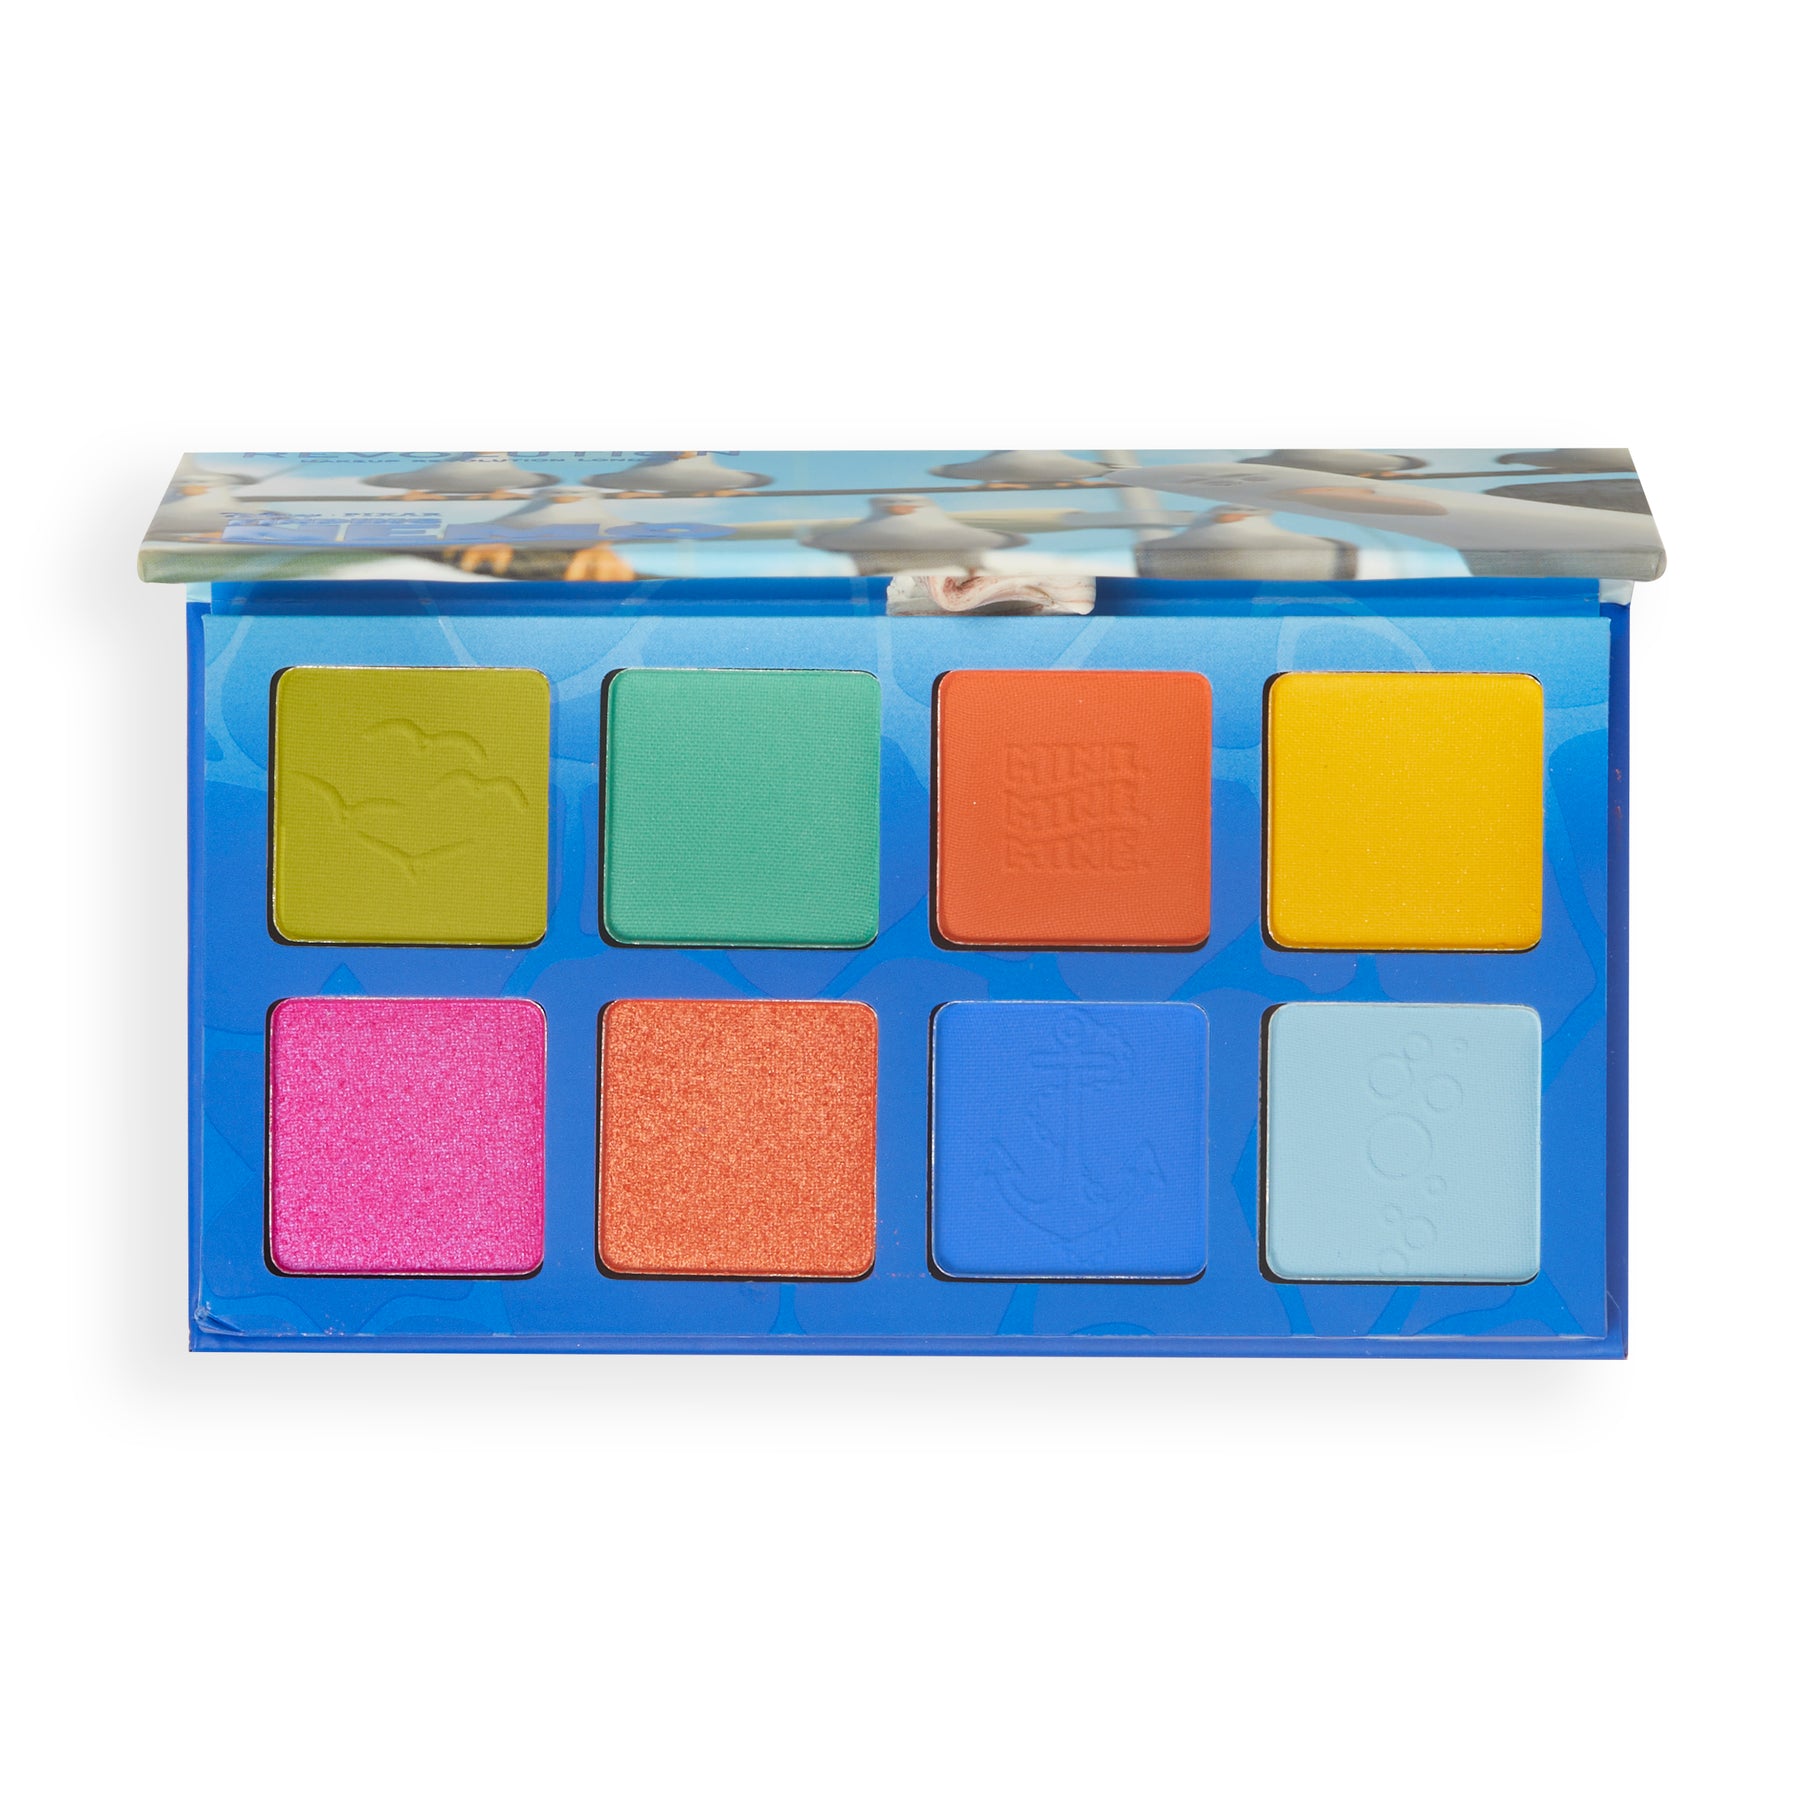 DISNEY & PIXAR’S FINDING NEMO AND REVOLUTION MINE SHADOW PALETTE OUTLET